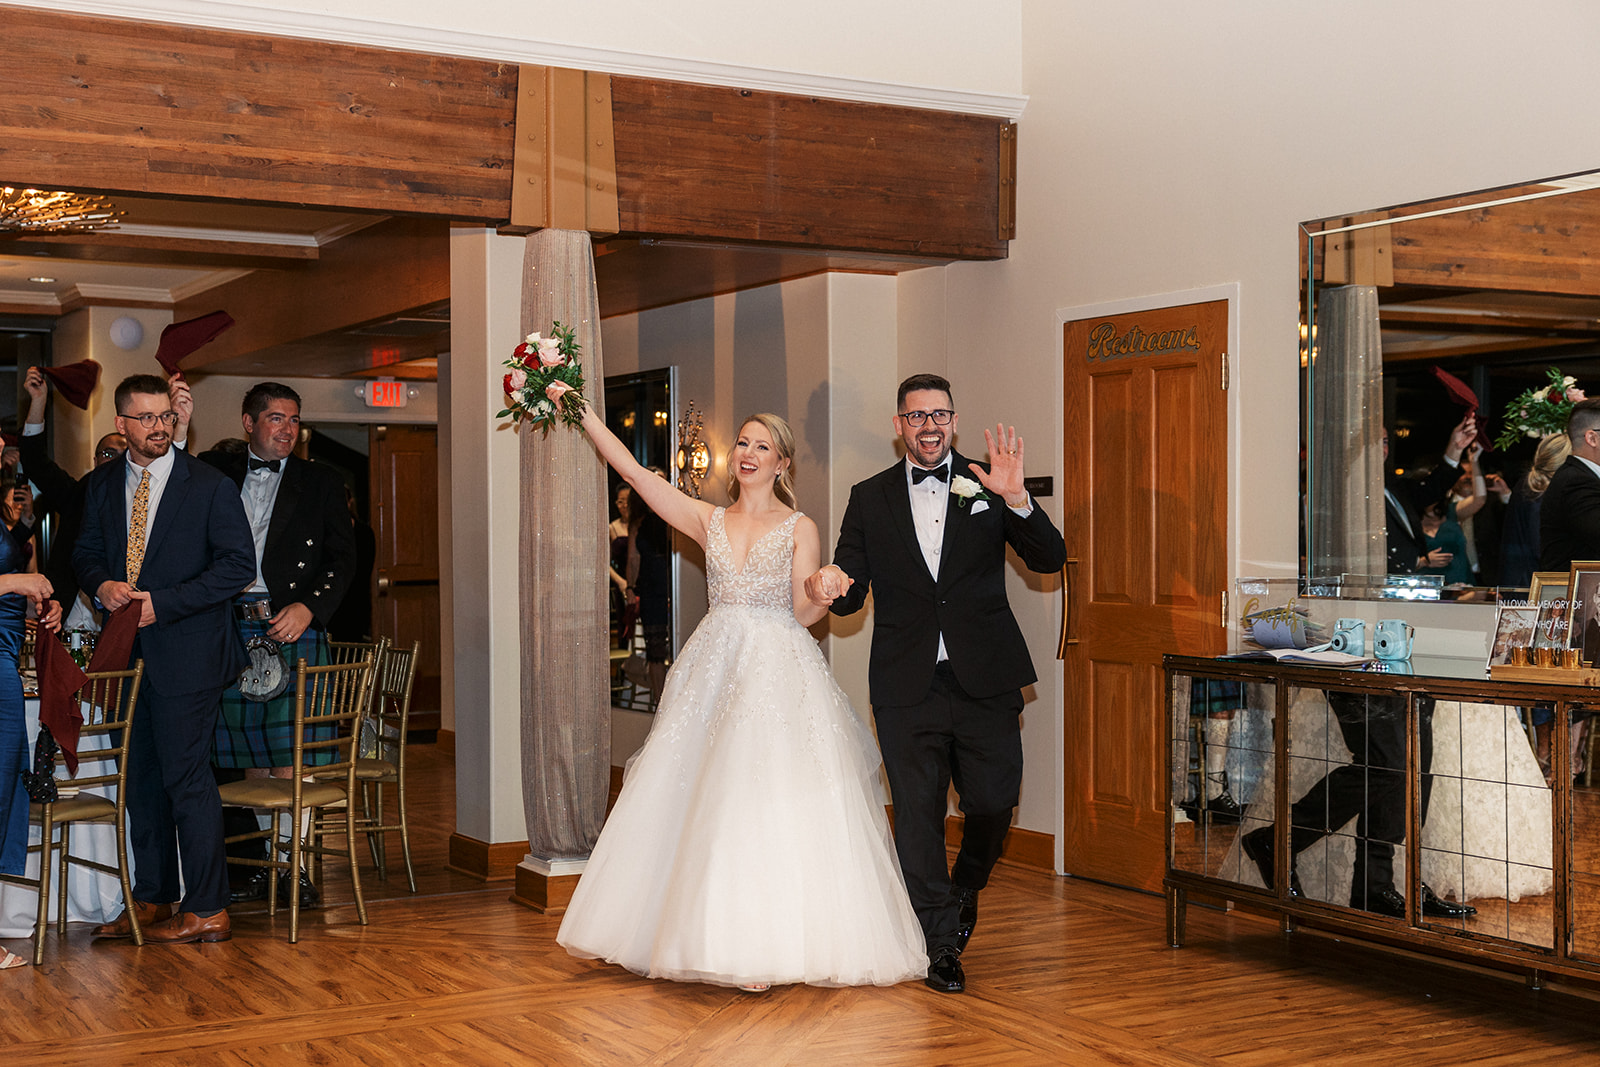 Newlyweds enter their wedding reception to cheers from guests